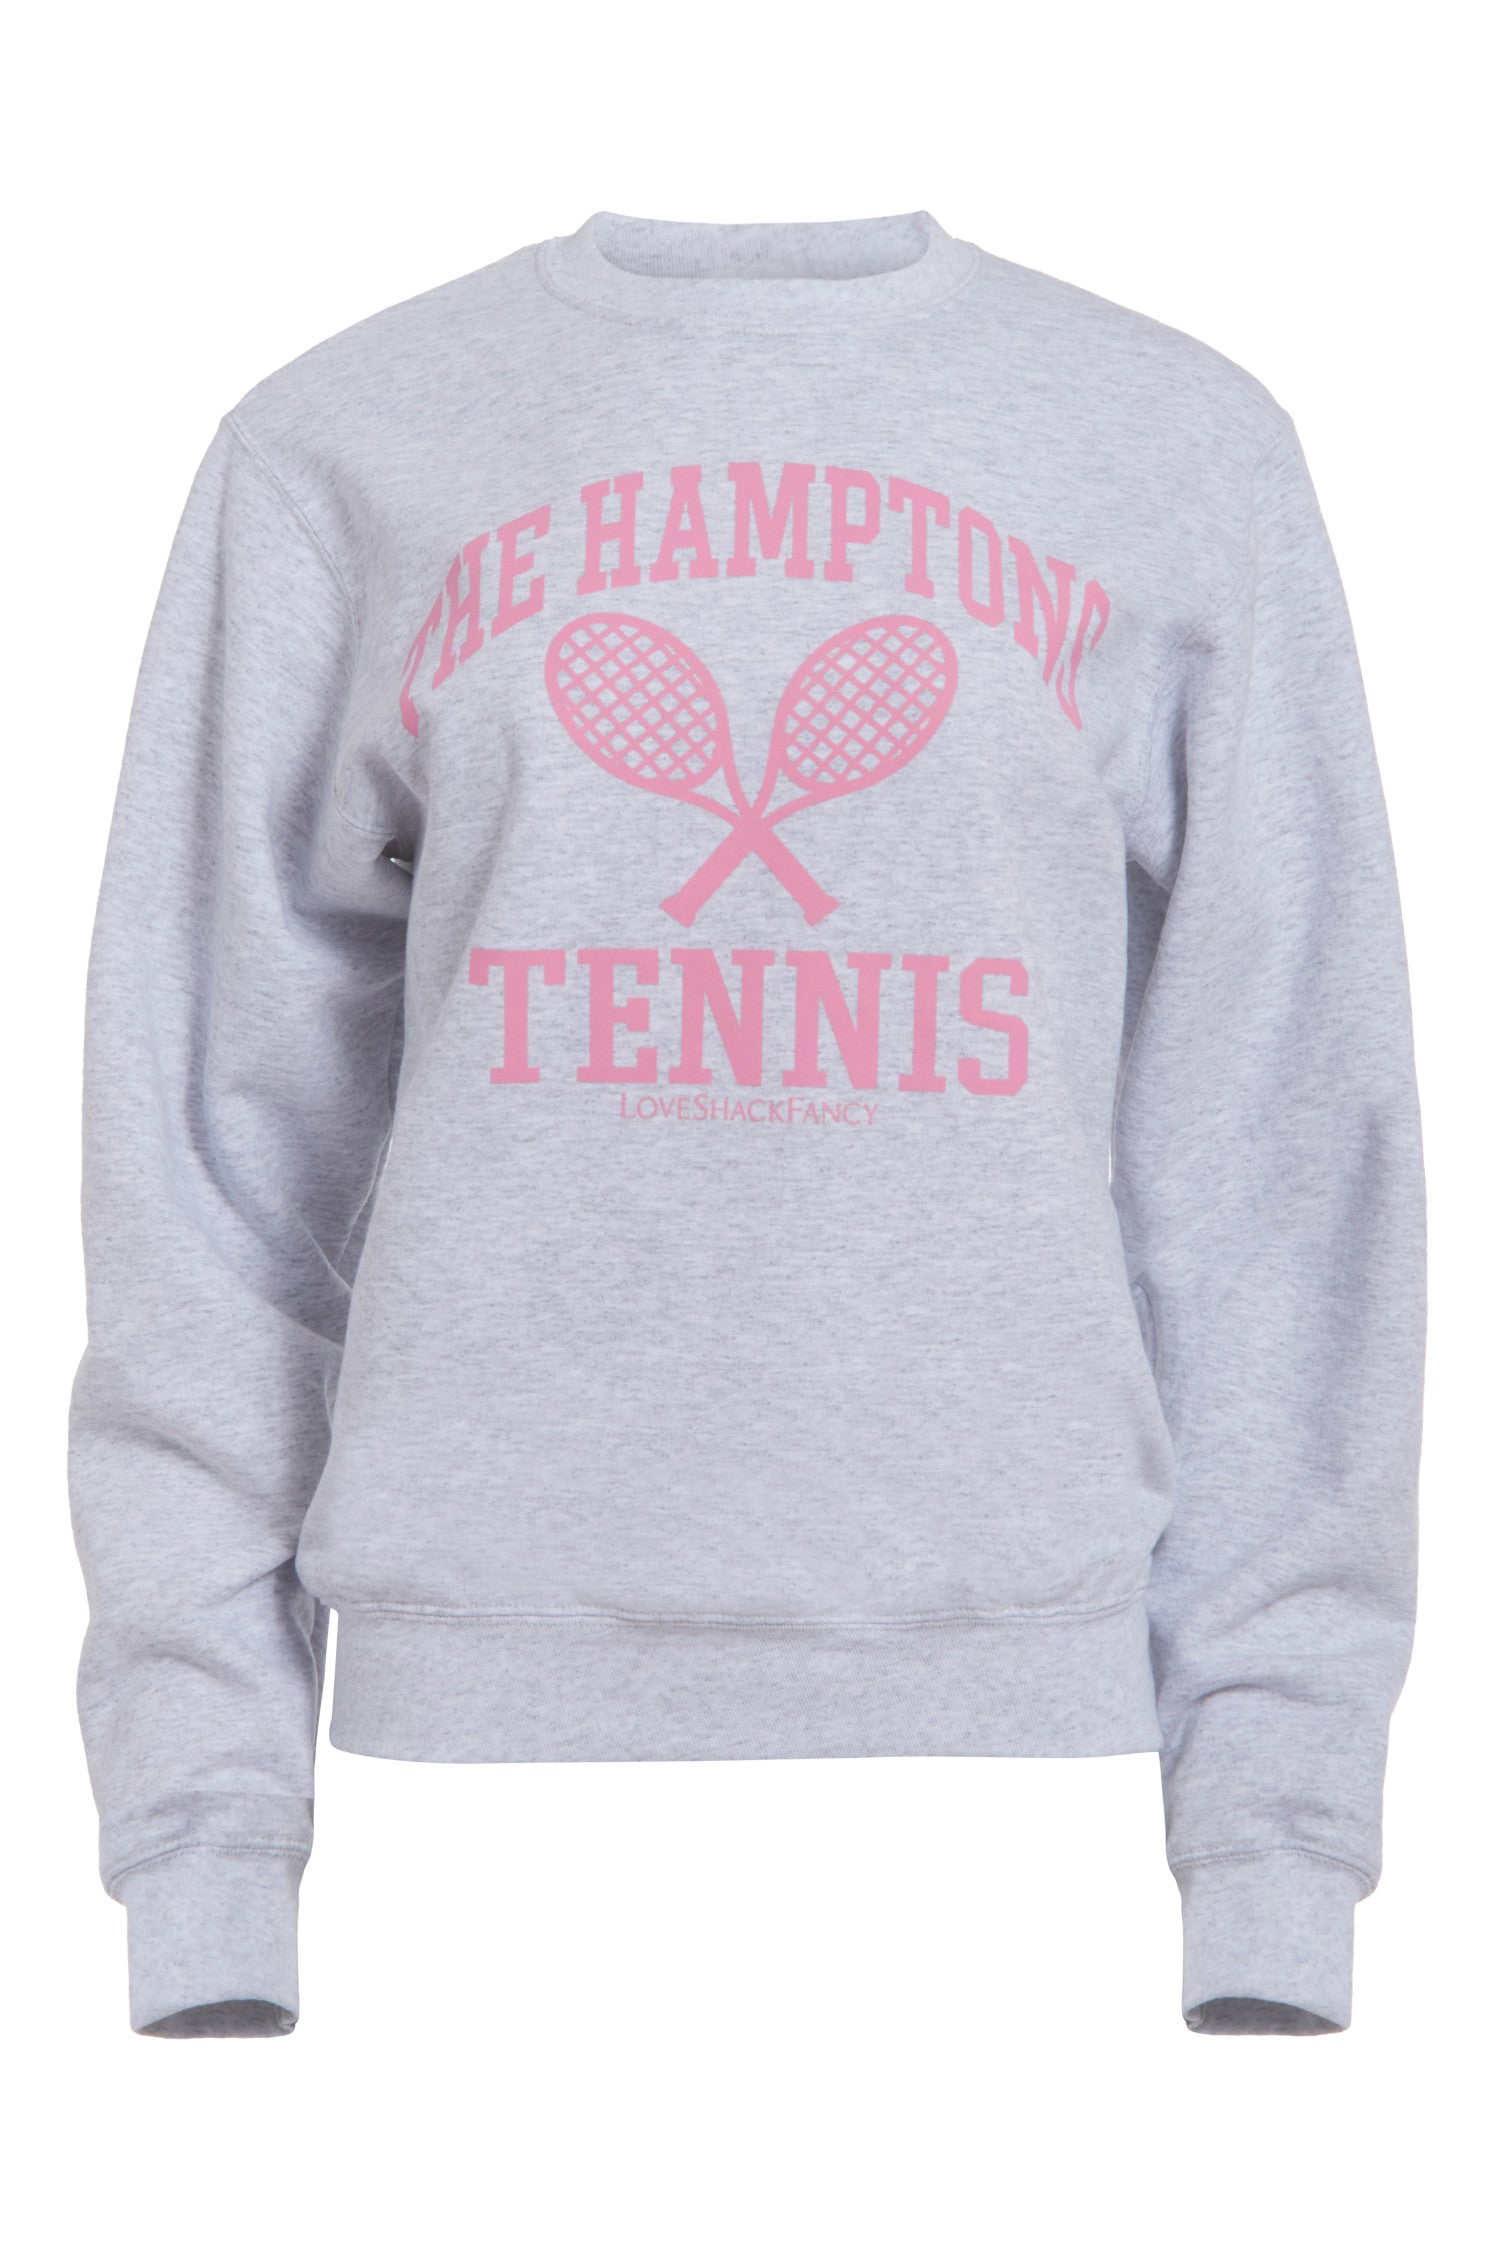 Flat Image of Pink Crew Neck Sweater with text "The Hamptons Tennis LoveShackFancy"